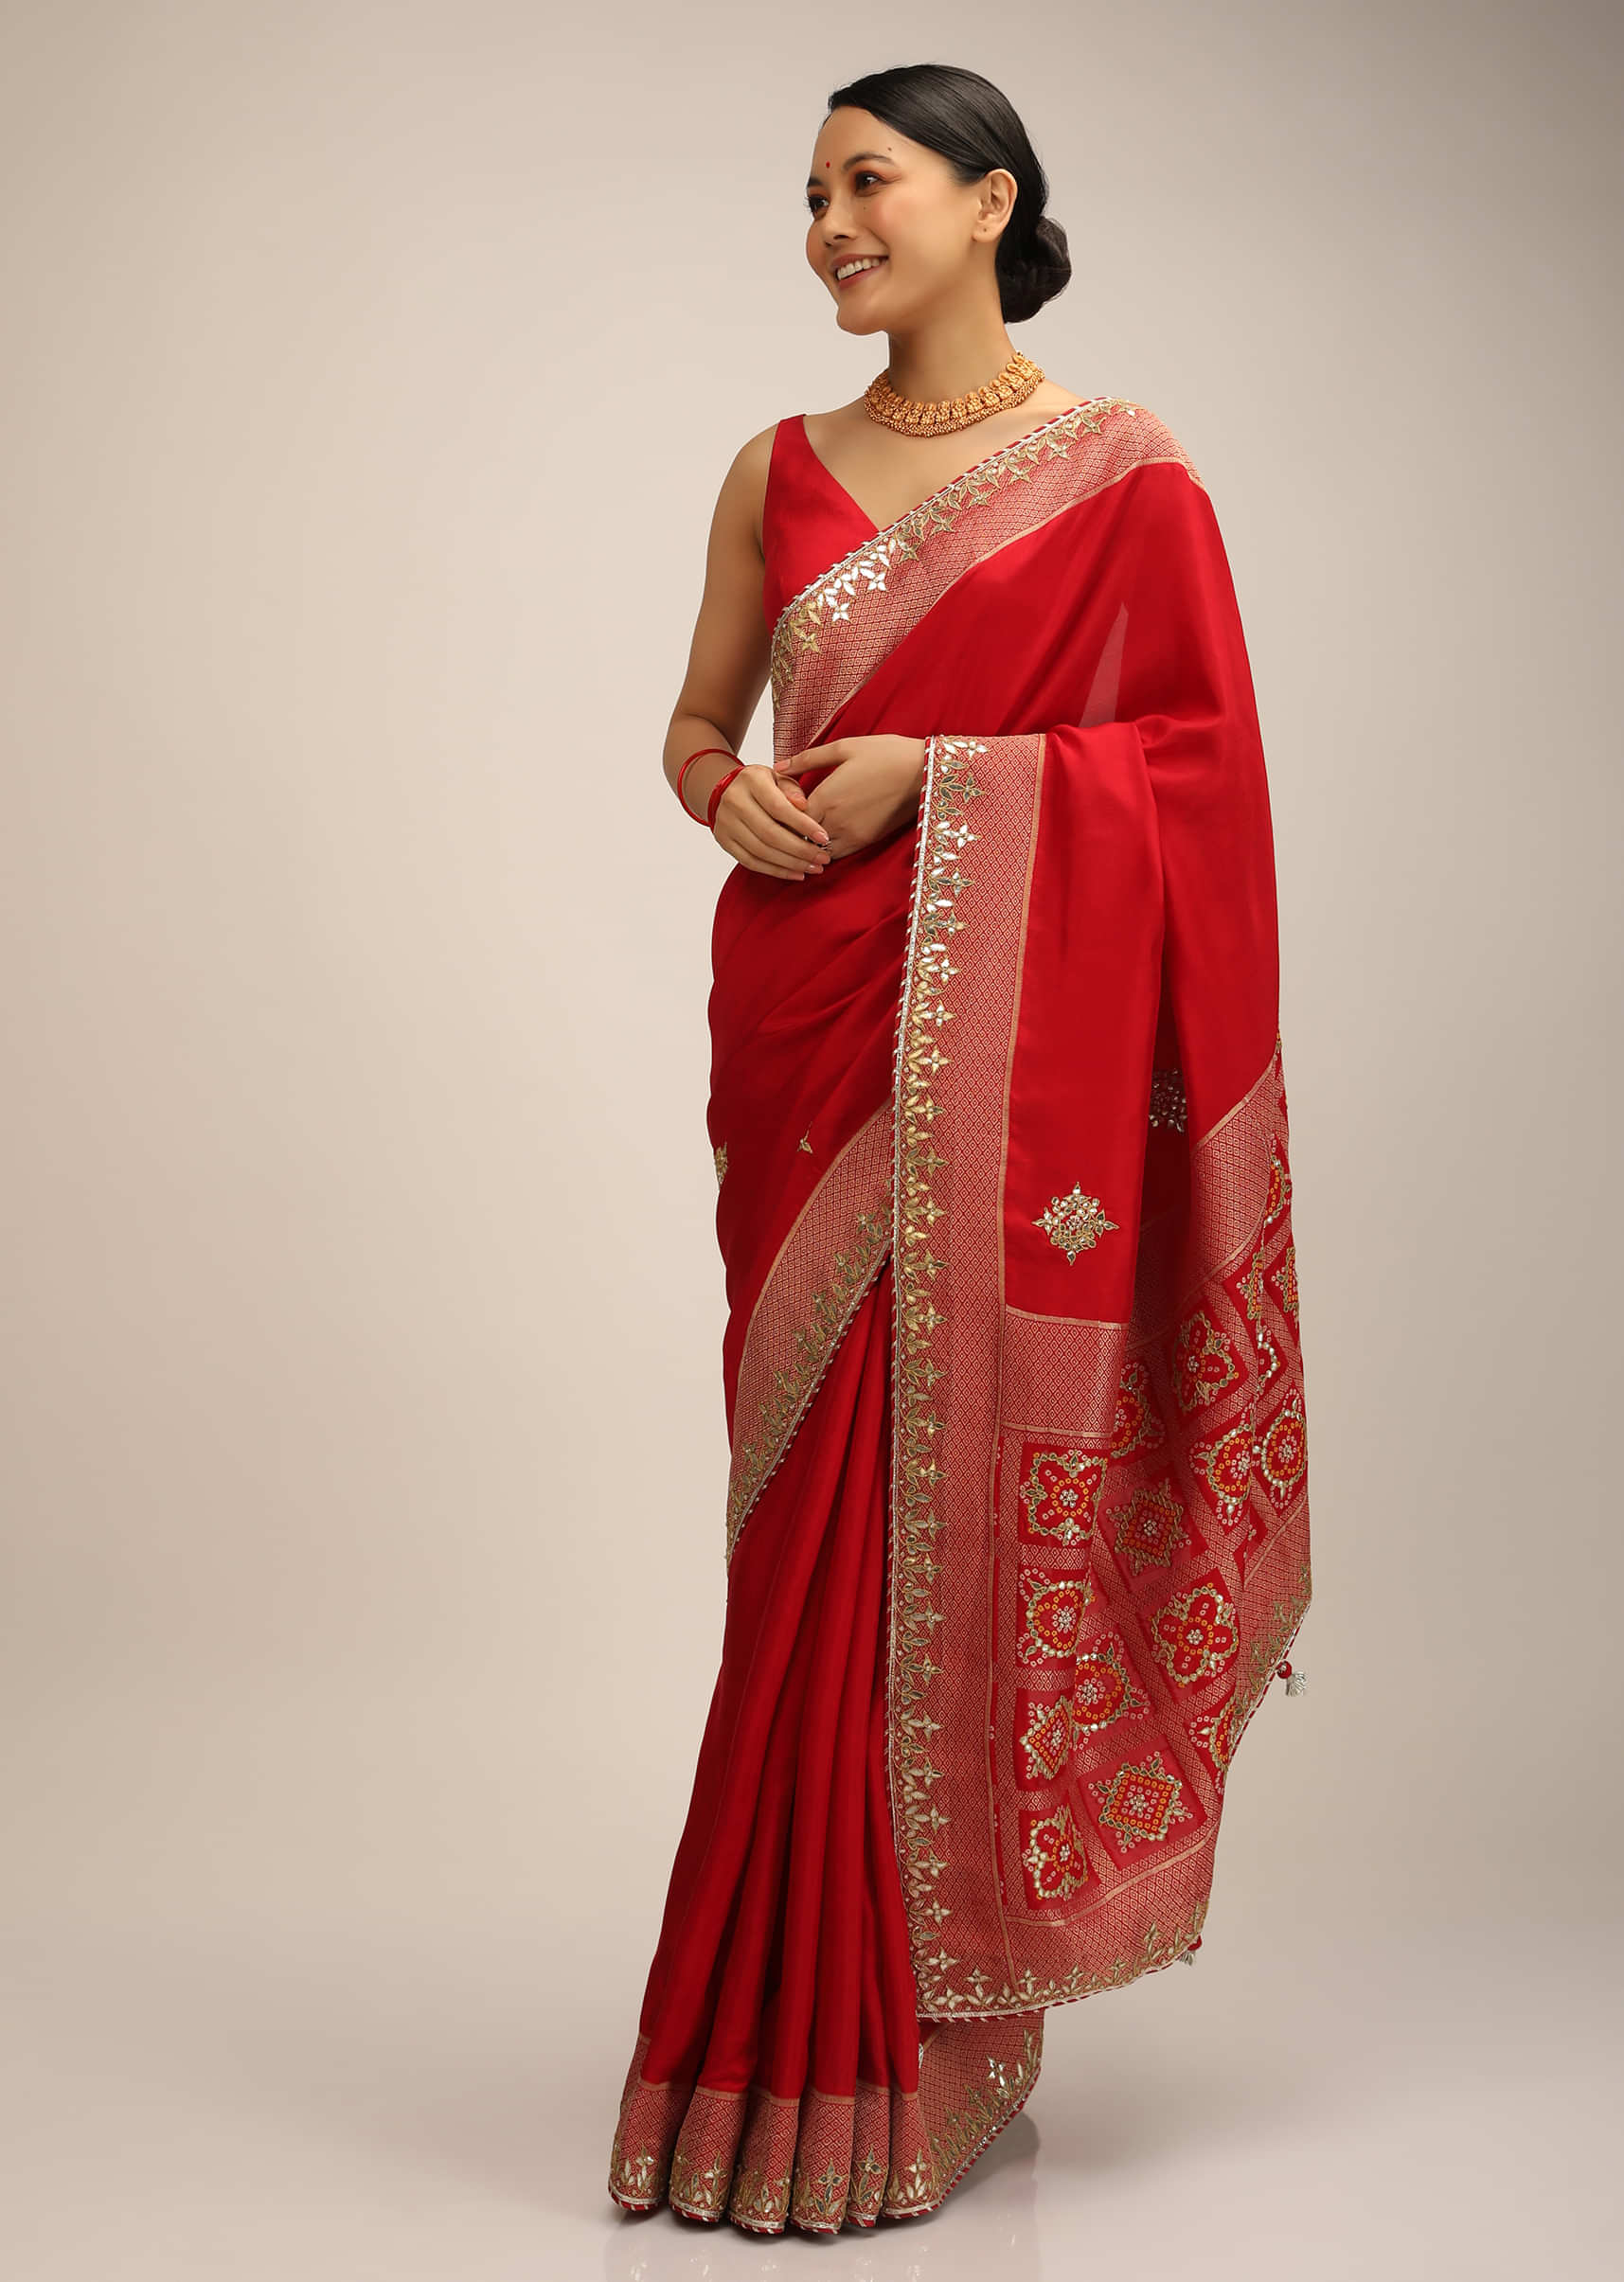 Red Saree In Silk With Brocade Geometric Design On The Pallu And Gotta Embroidery